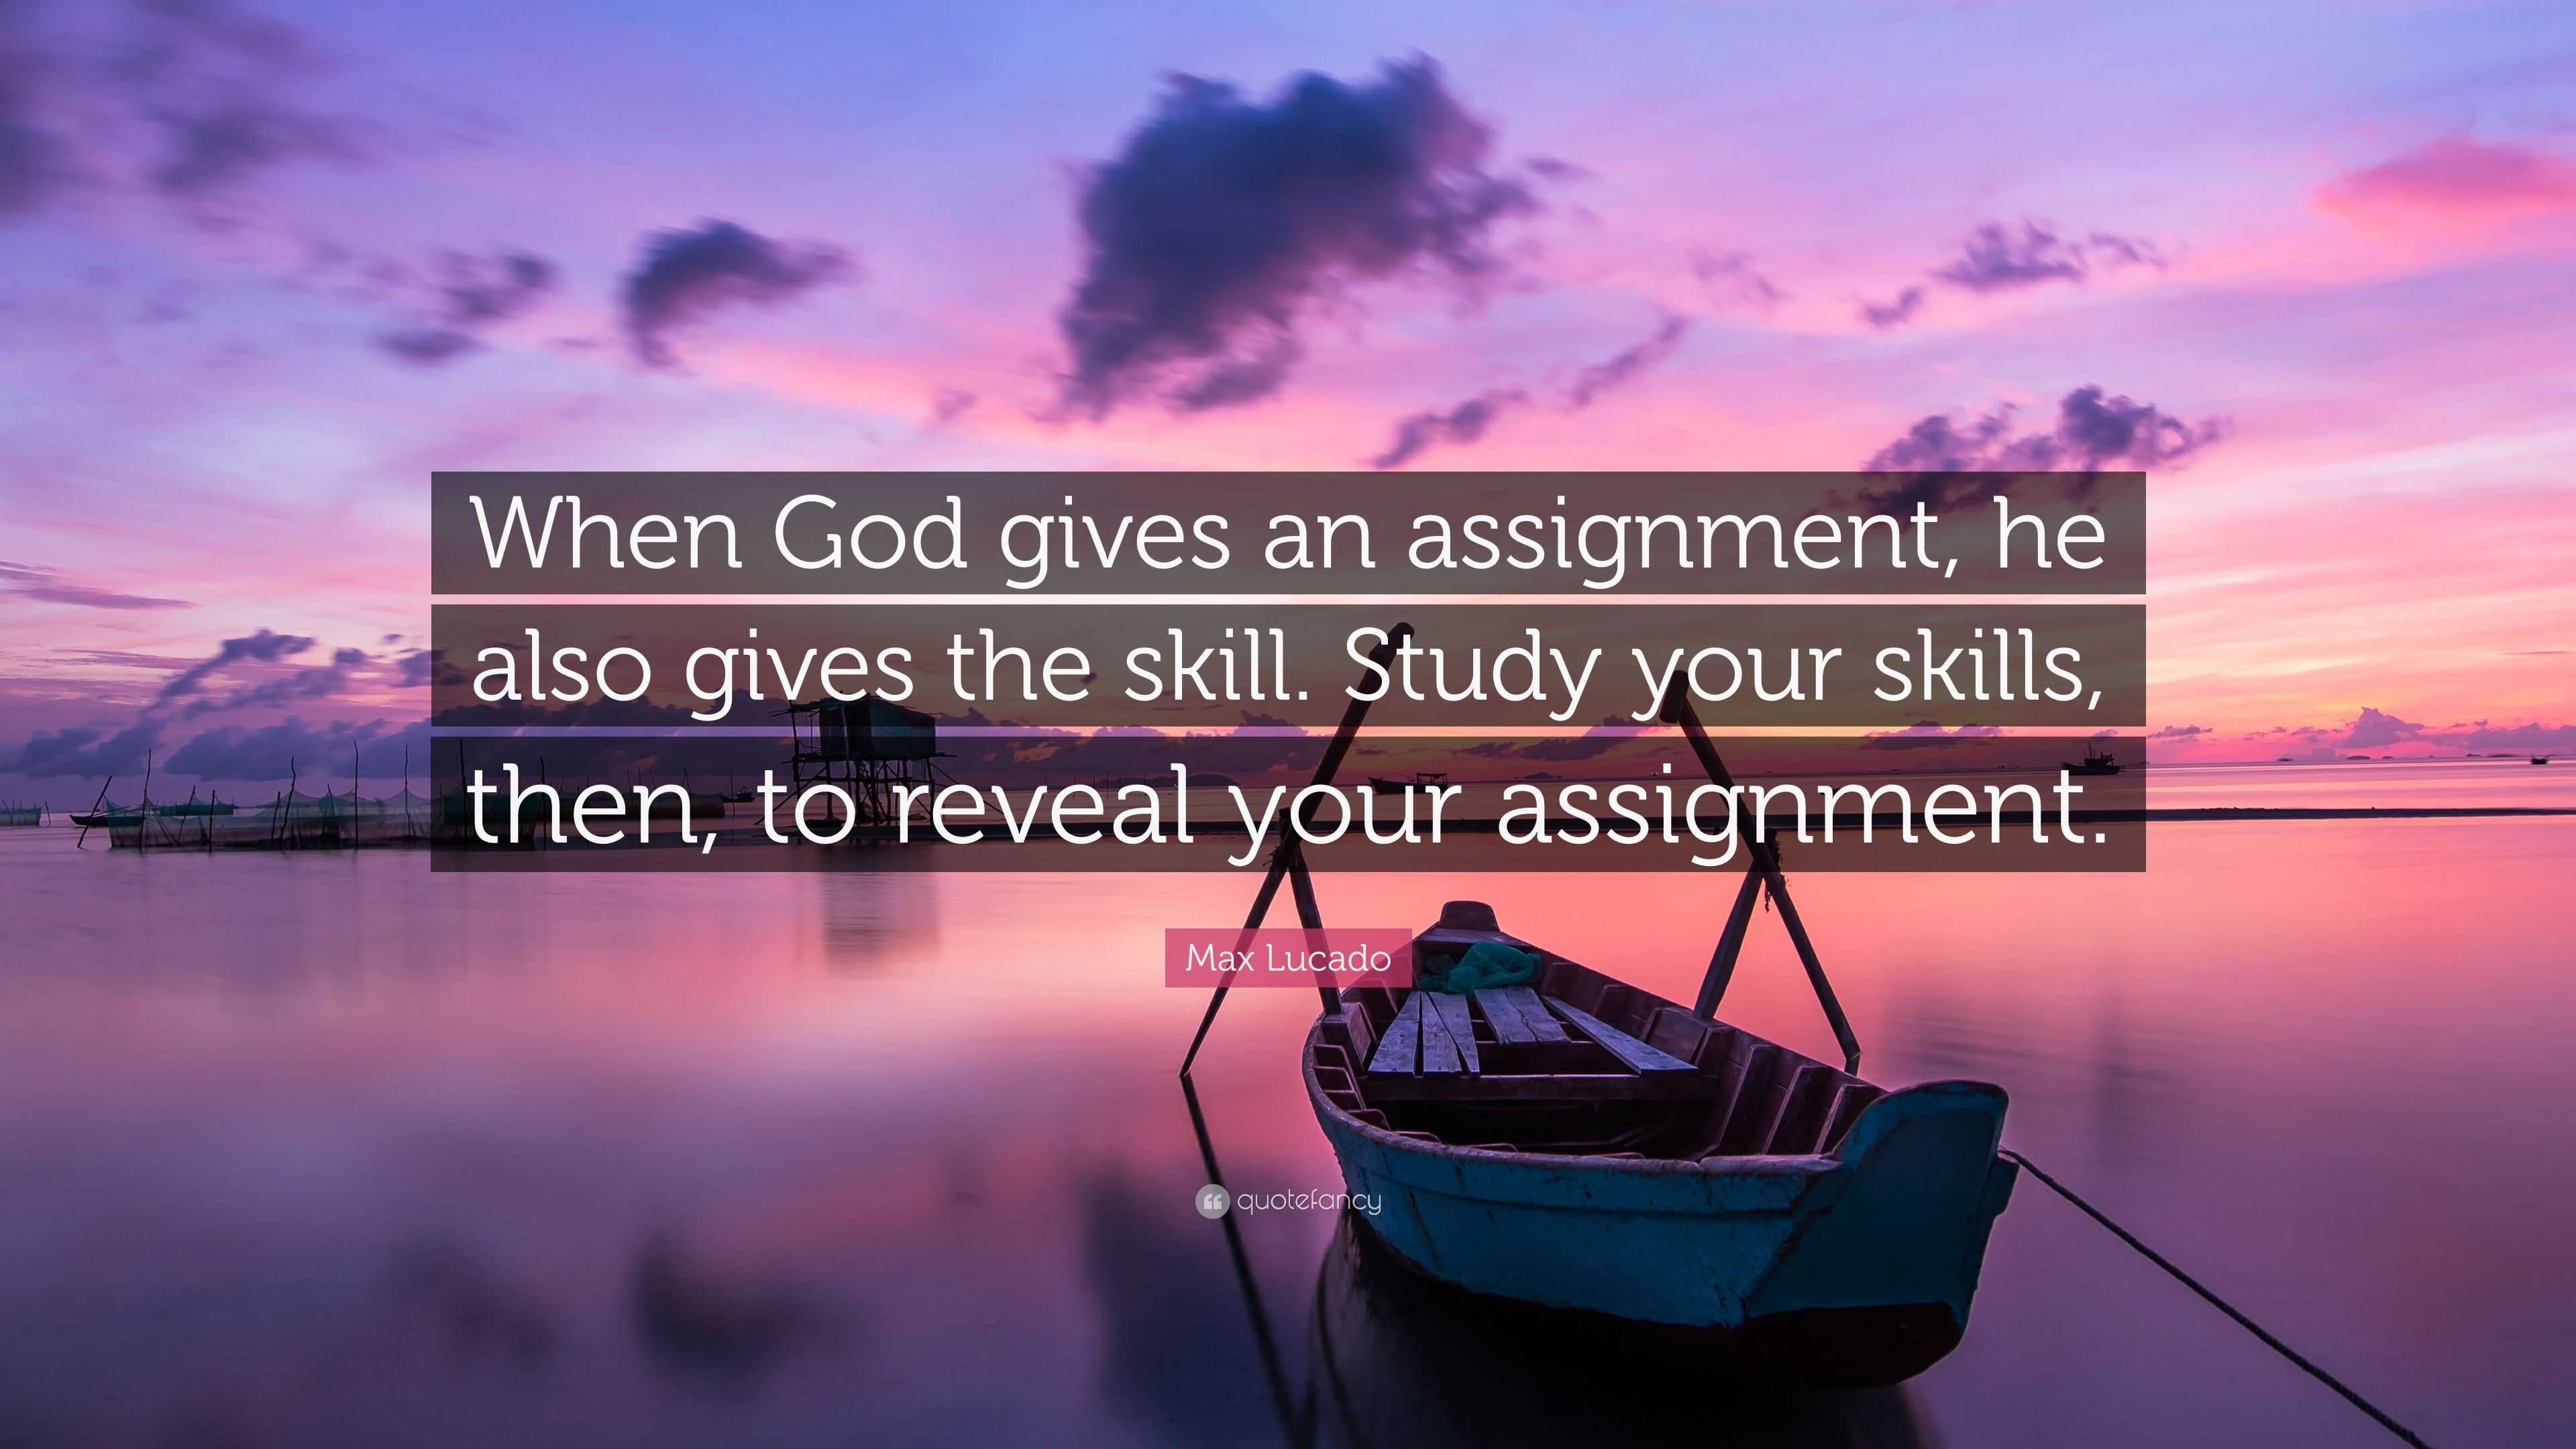 your assignment from god